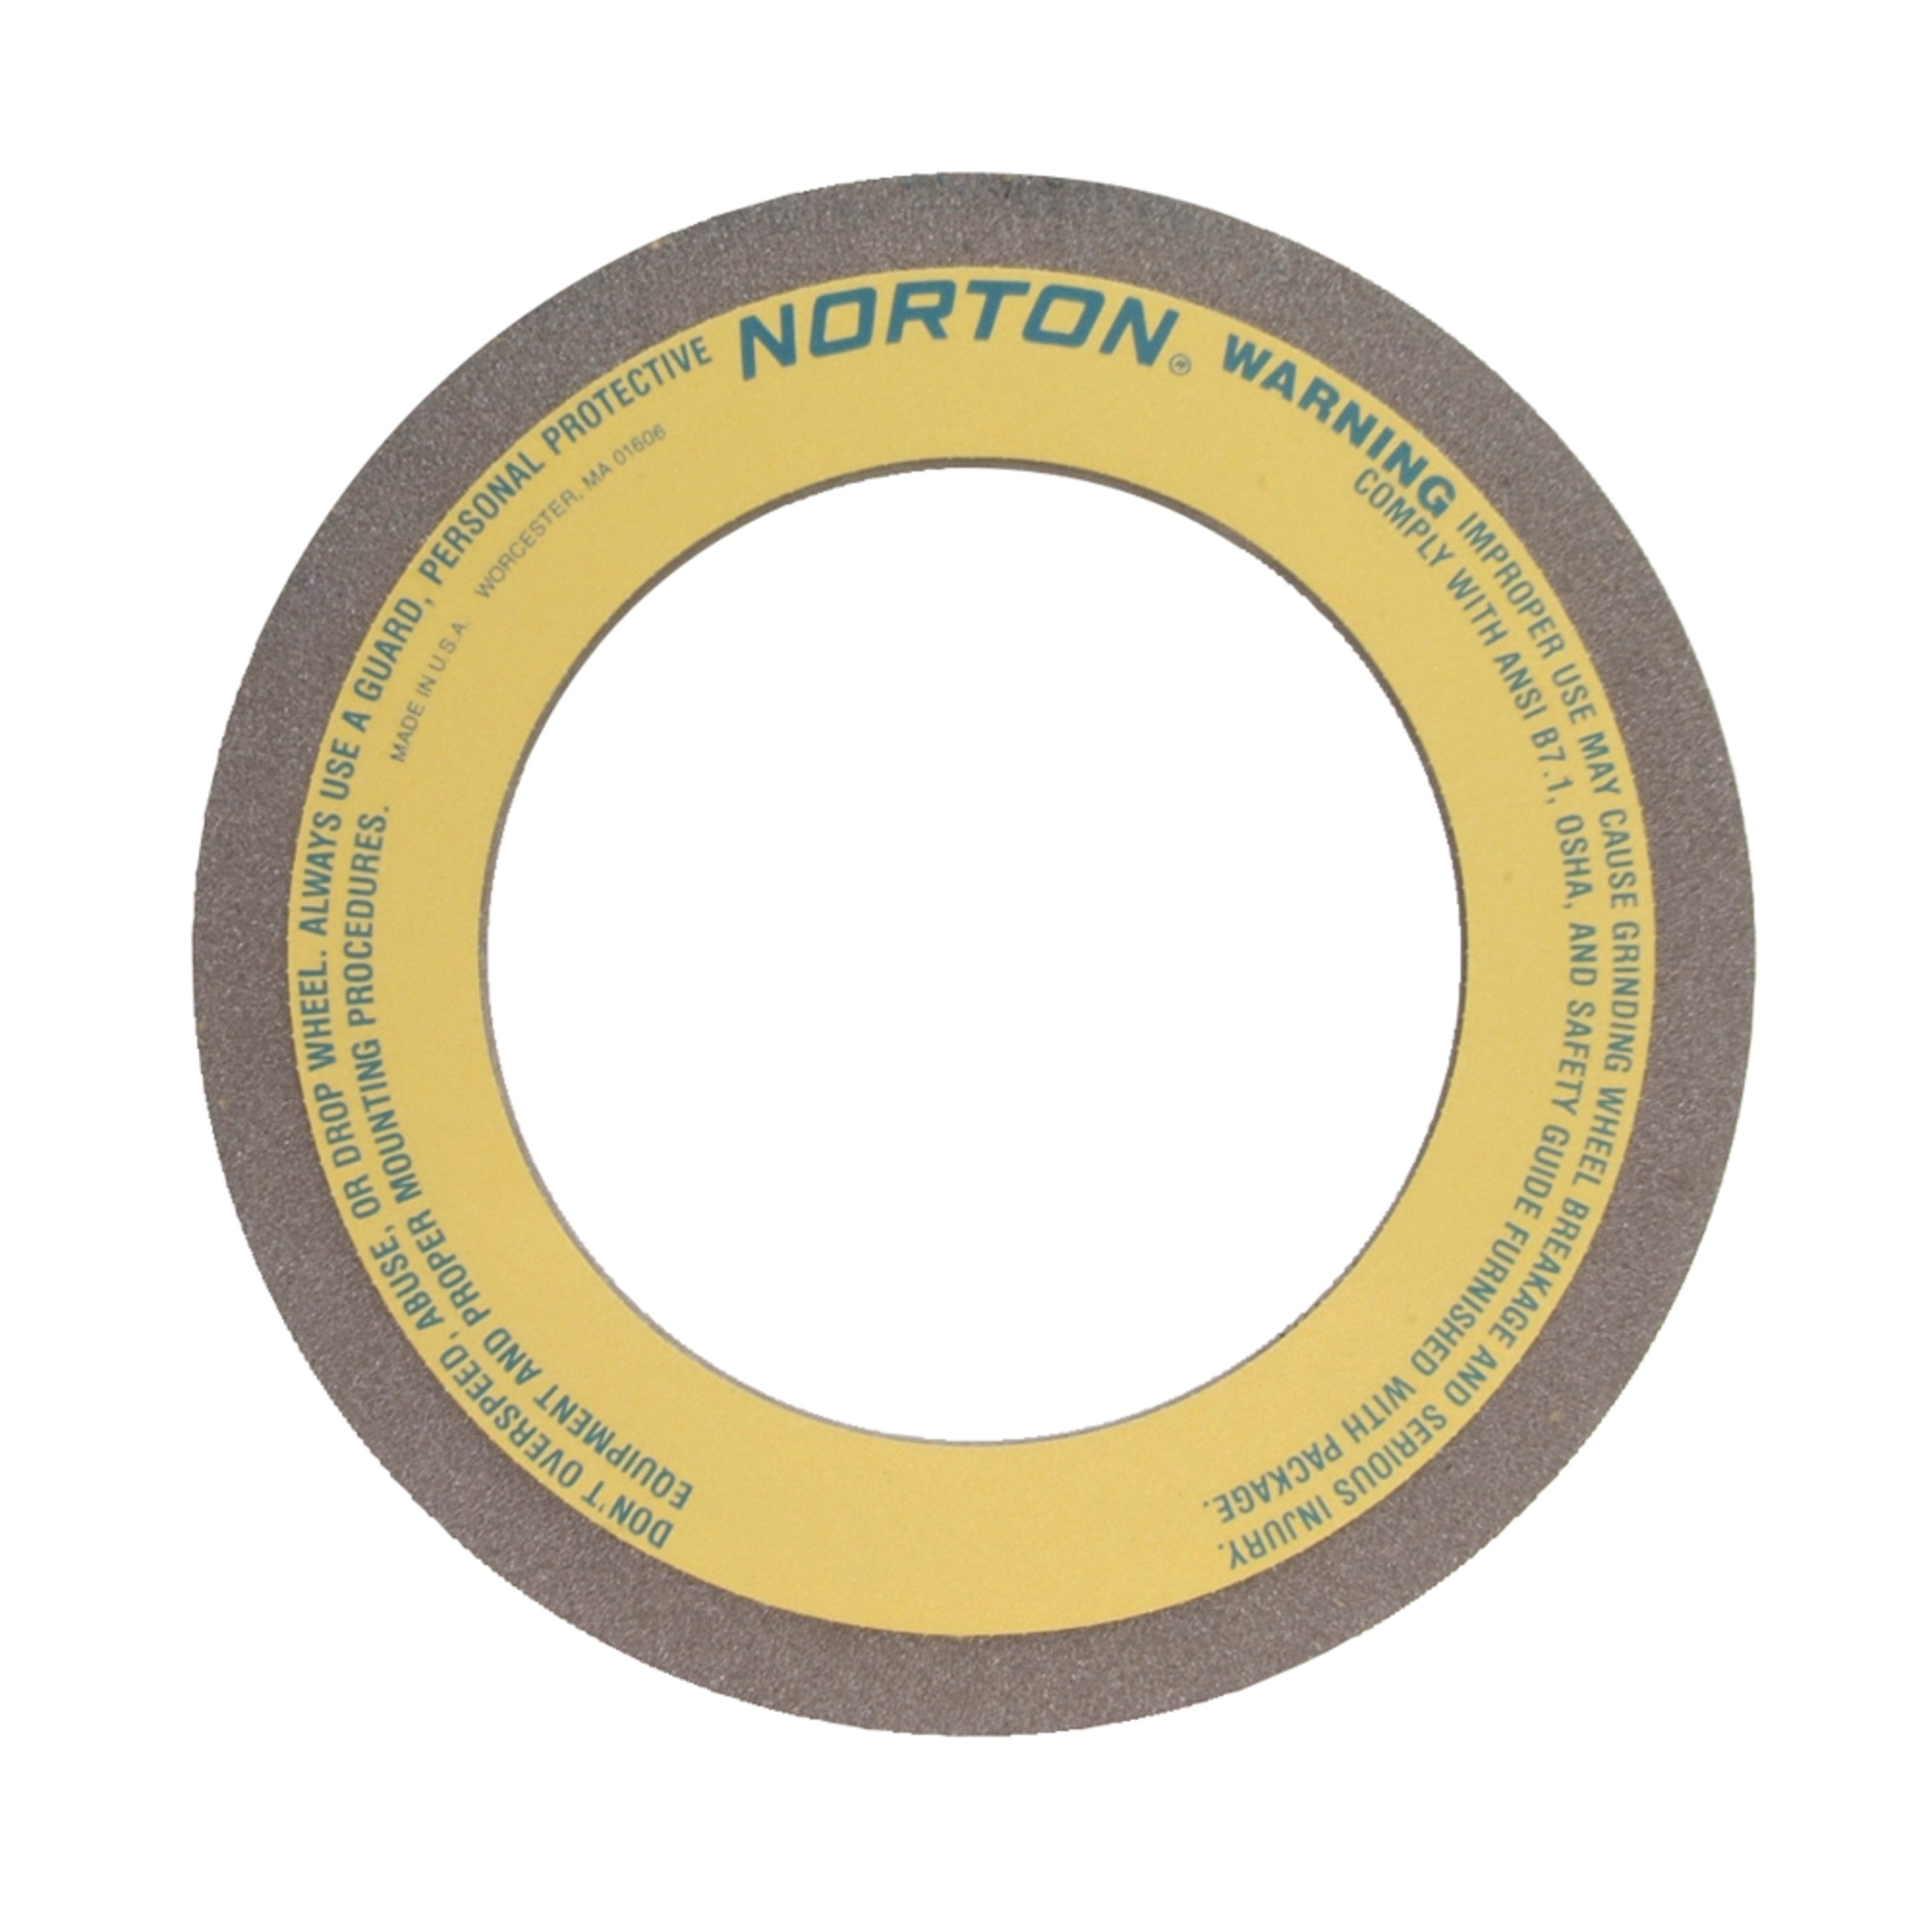 Norton® 66253465001 57A Centerless Grinding Wheel, 16 in Dia x 4 in THK, 10 in Center Hole, 80 Grit, Aluminum Oxide Abrasive